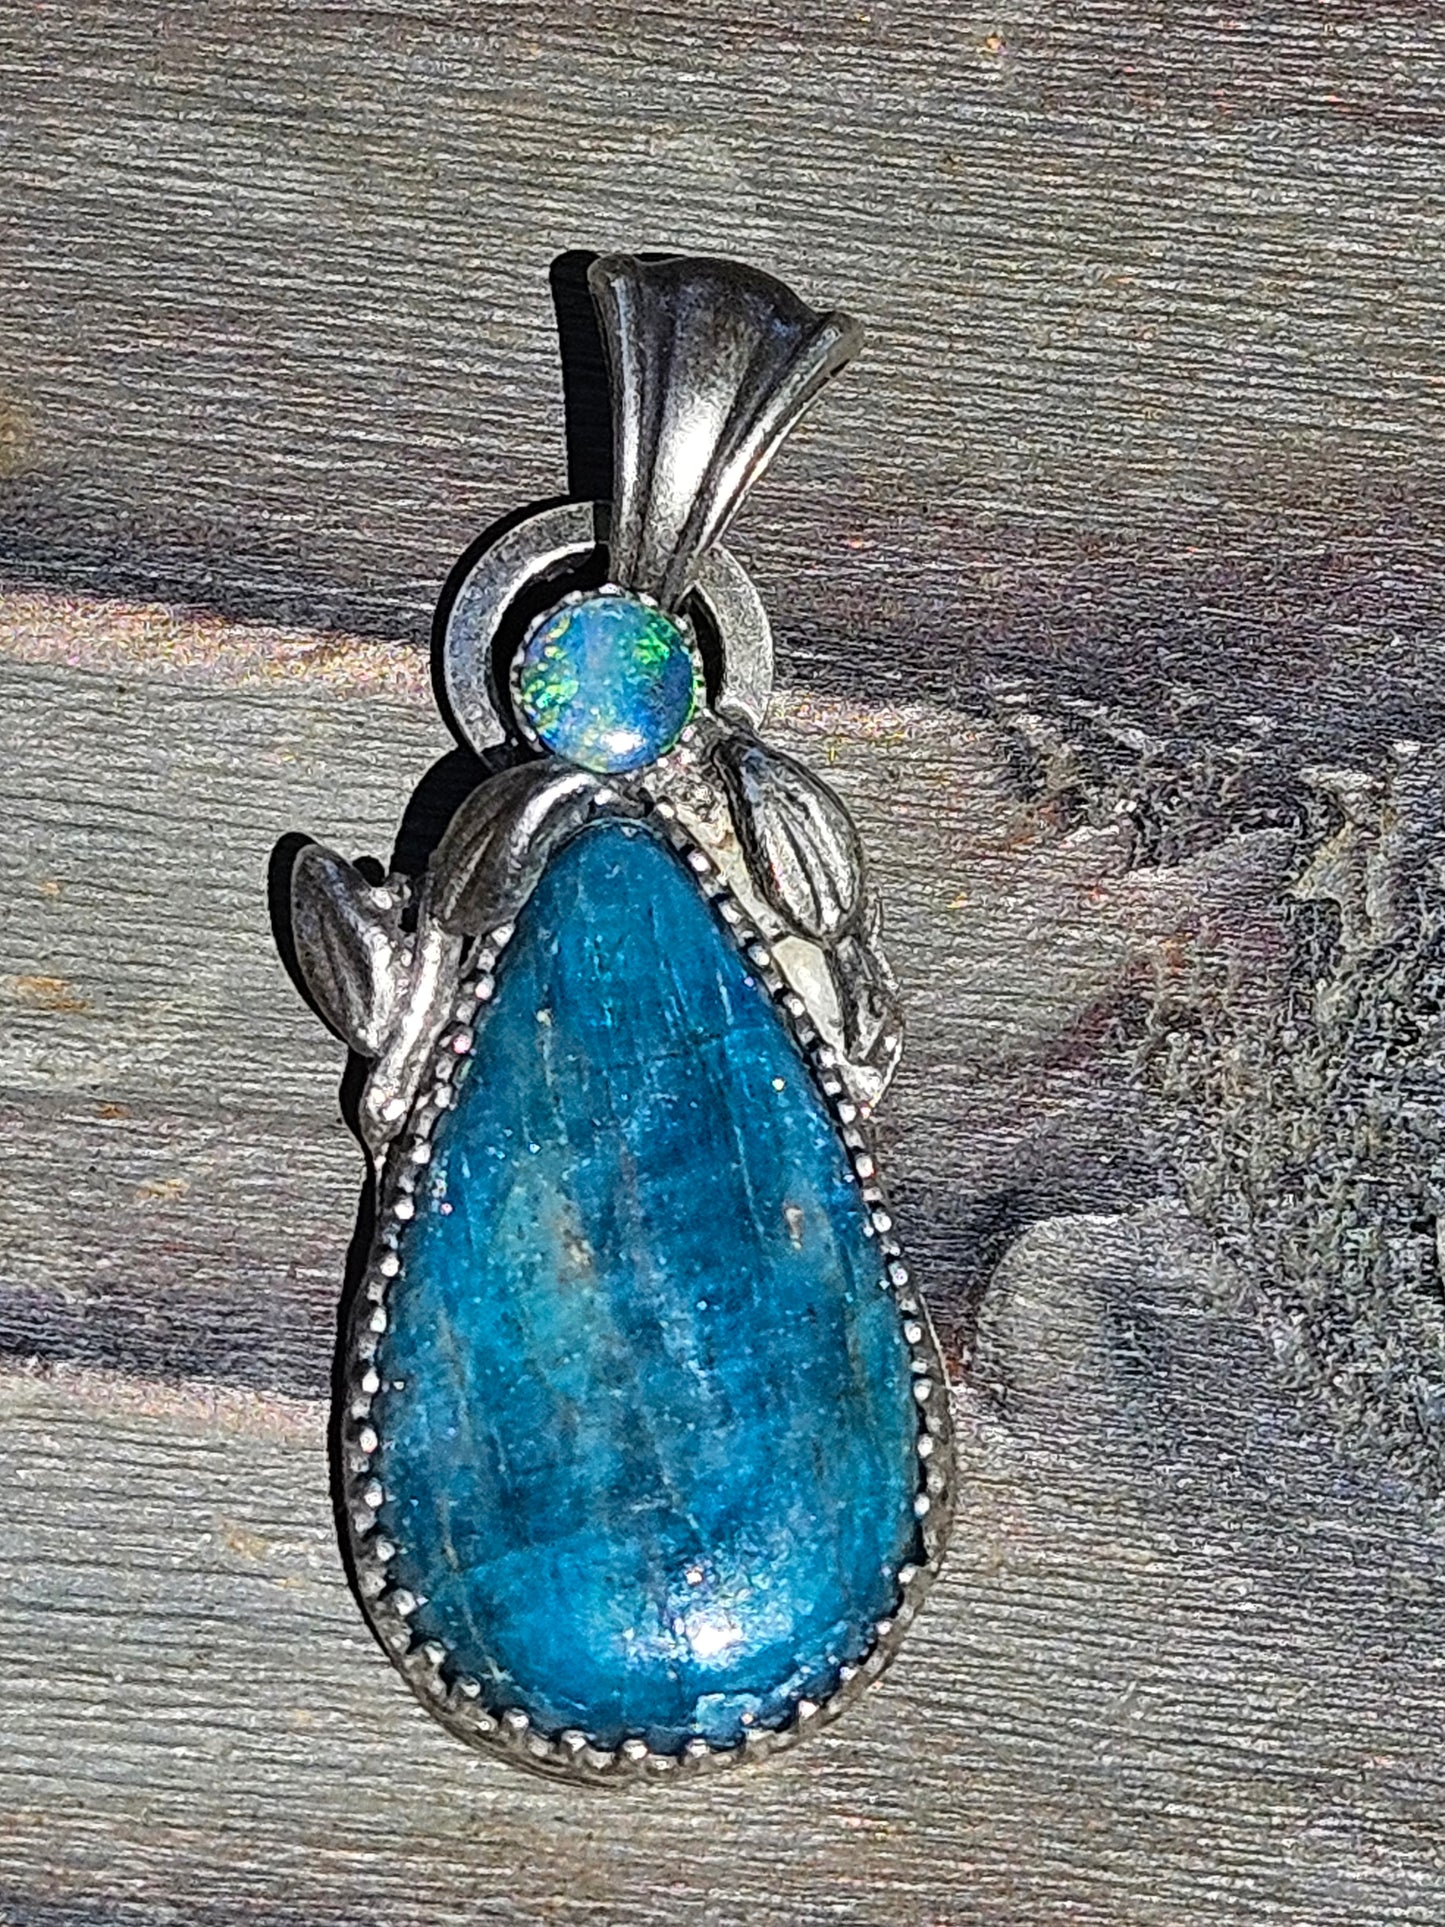 Blue Apatite and Australian Opal Pendant with Vines